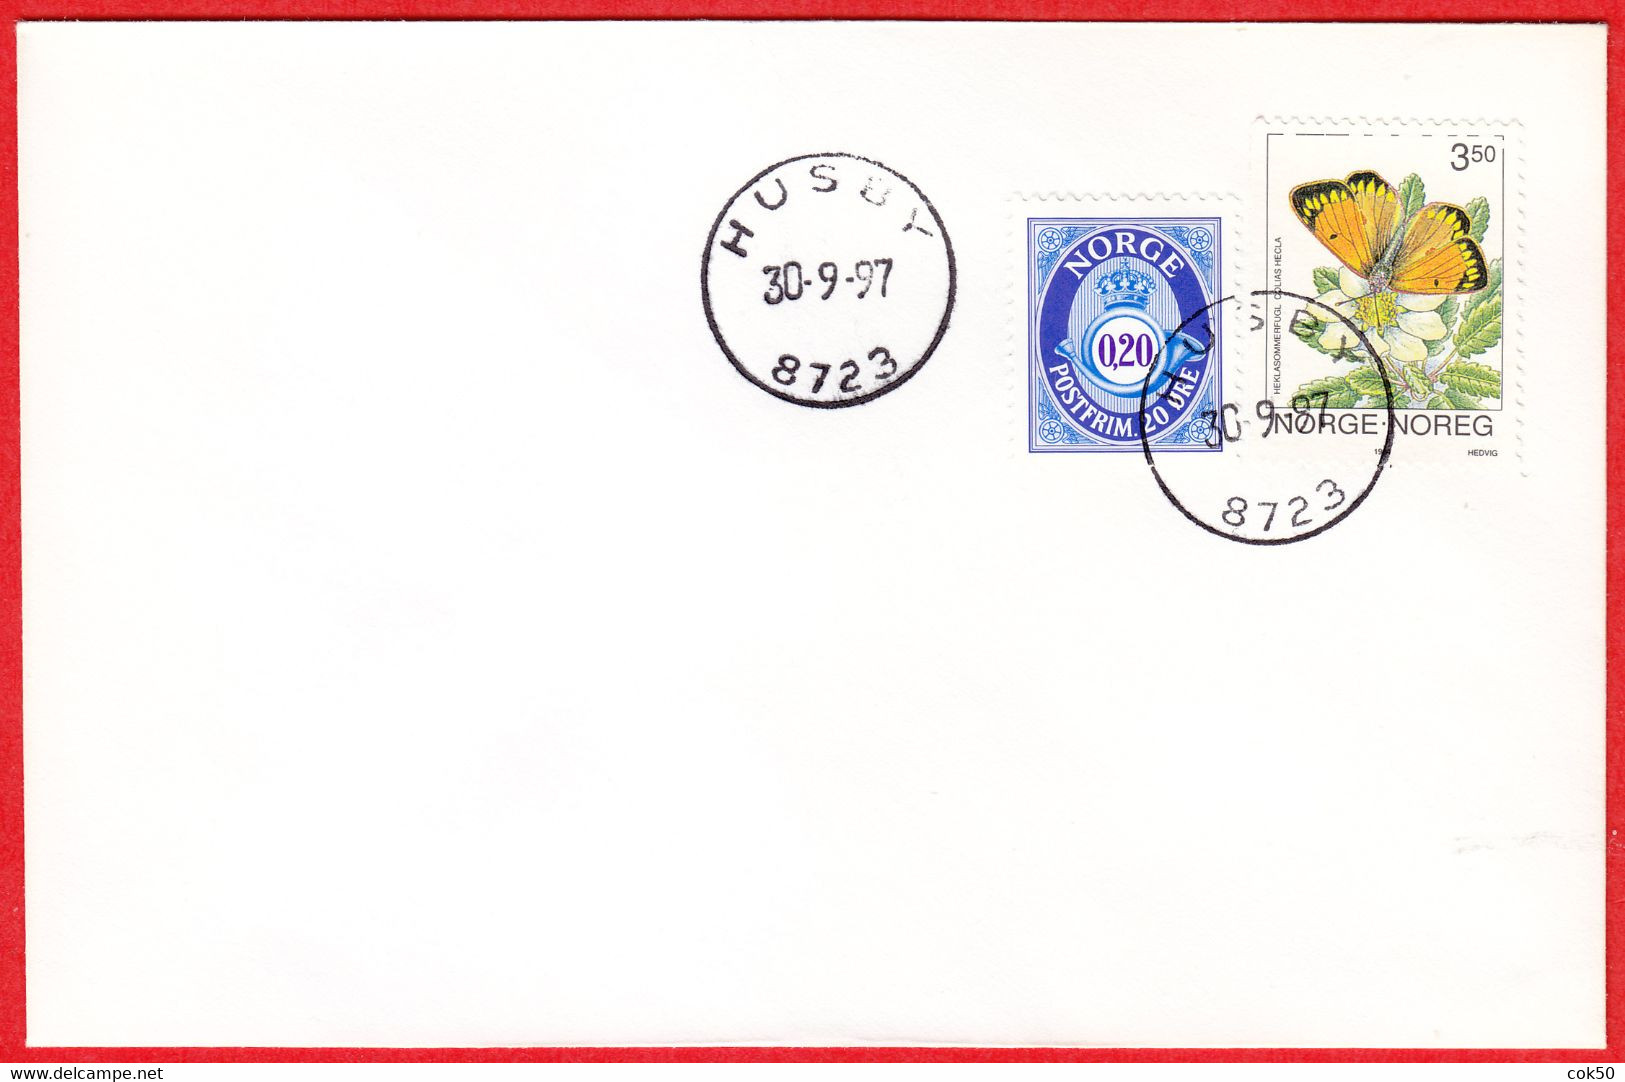 NORWAY -  8723 HUSBY - (Nordland County) - Last Day/postoffice Closed On 1997.09.30 - Emissioni Locali